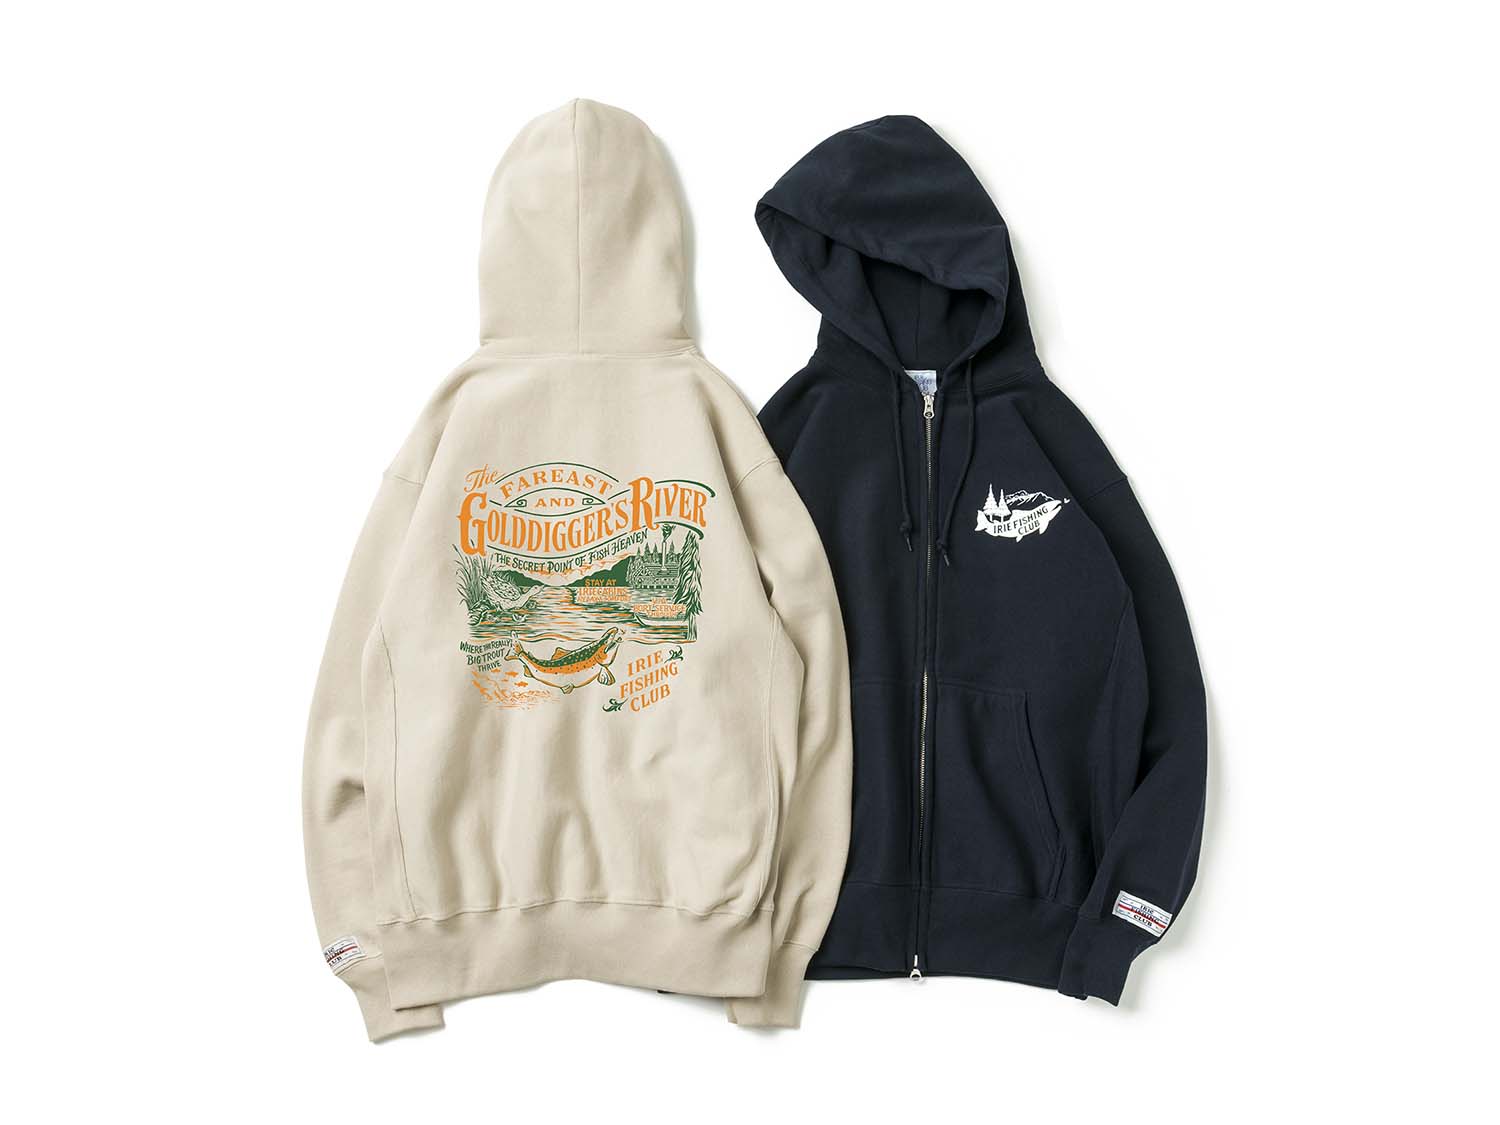 ×NATURALLY PAINT - GOLD DIGGER’S RIVER ZIP UP HOODIE - IRIE FISHING CLUB